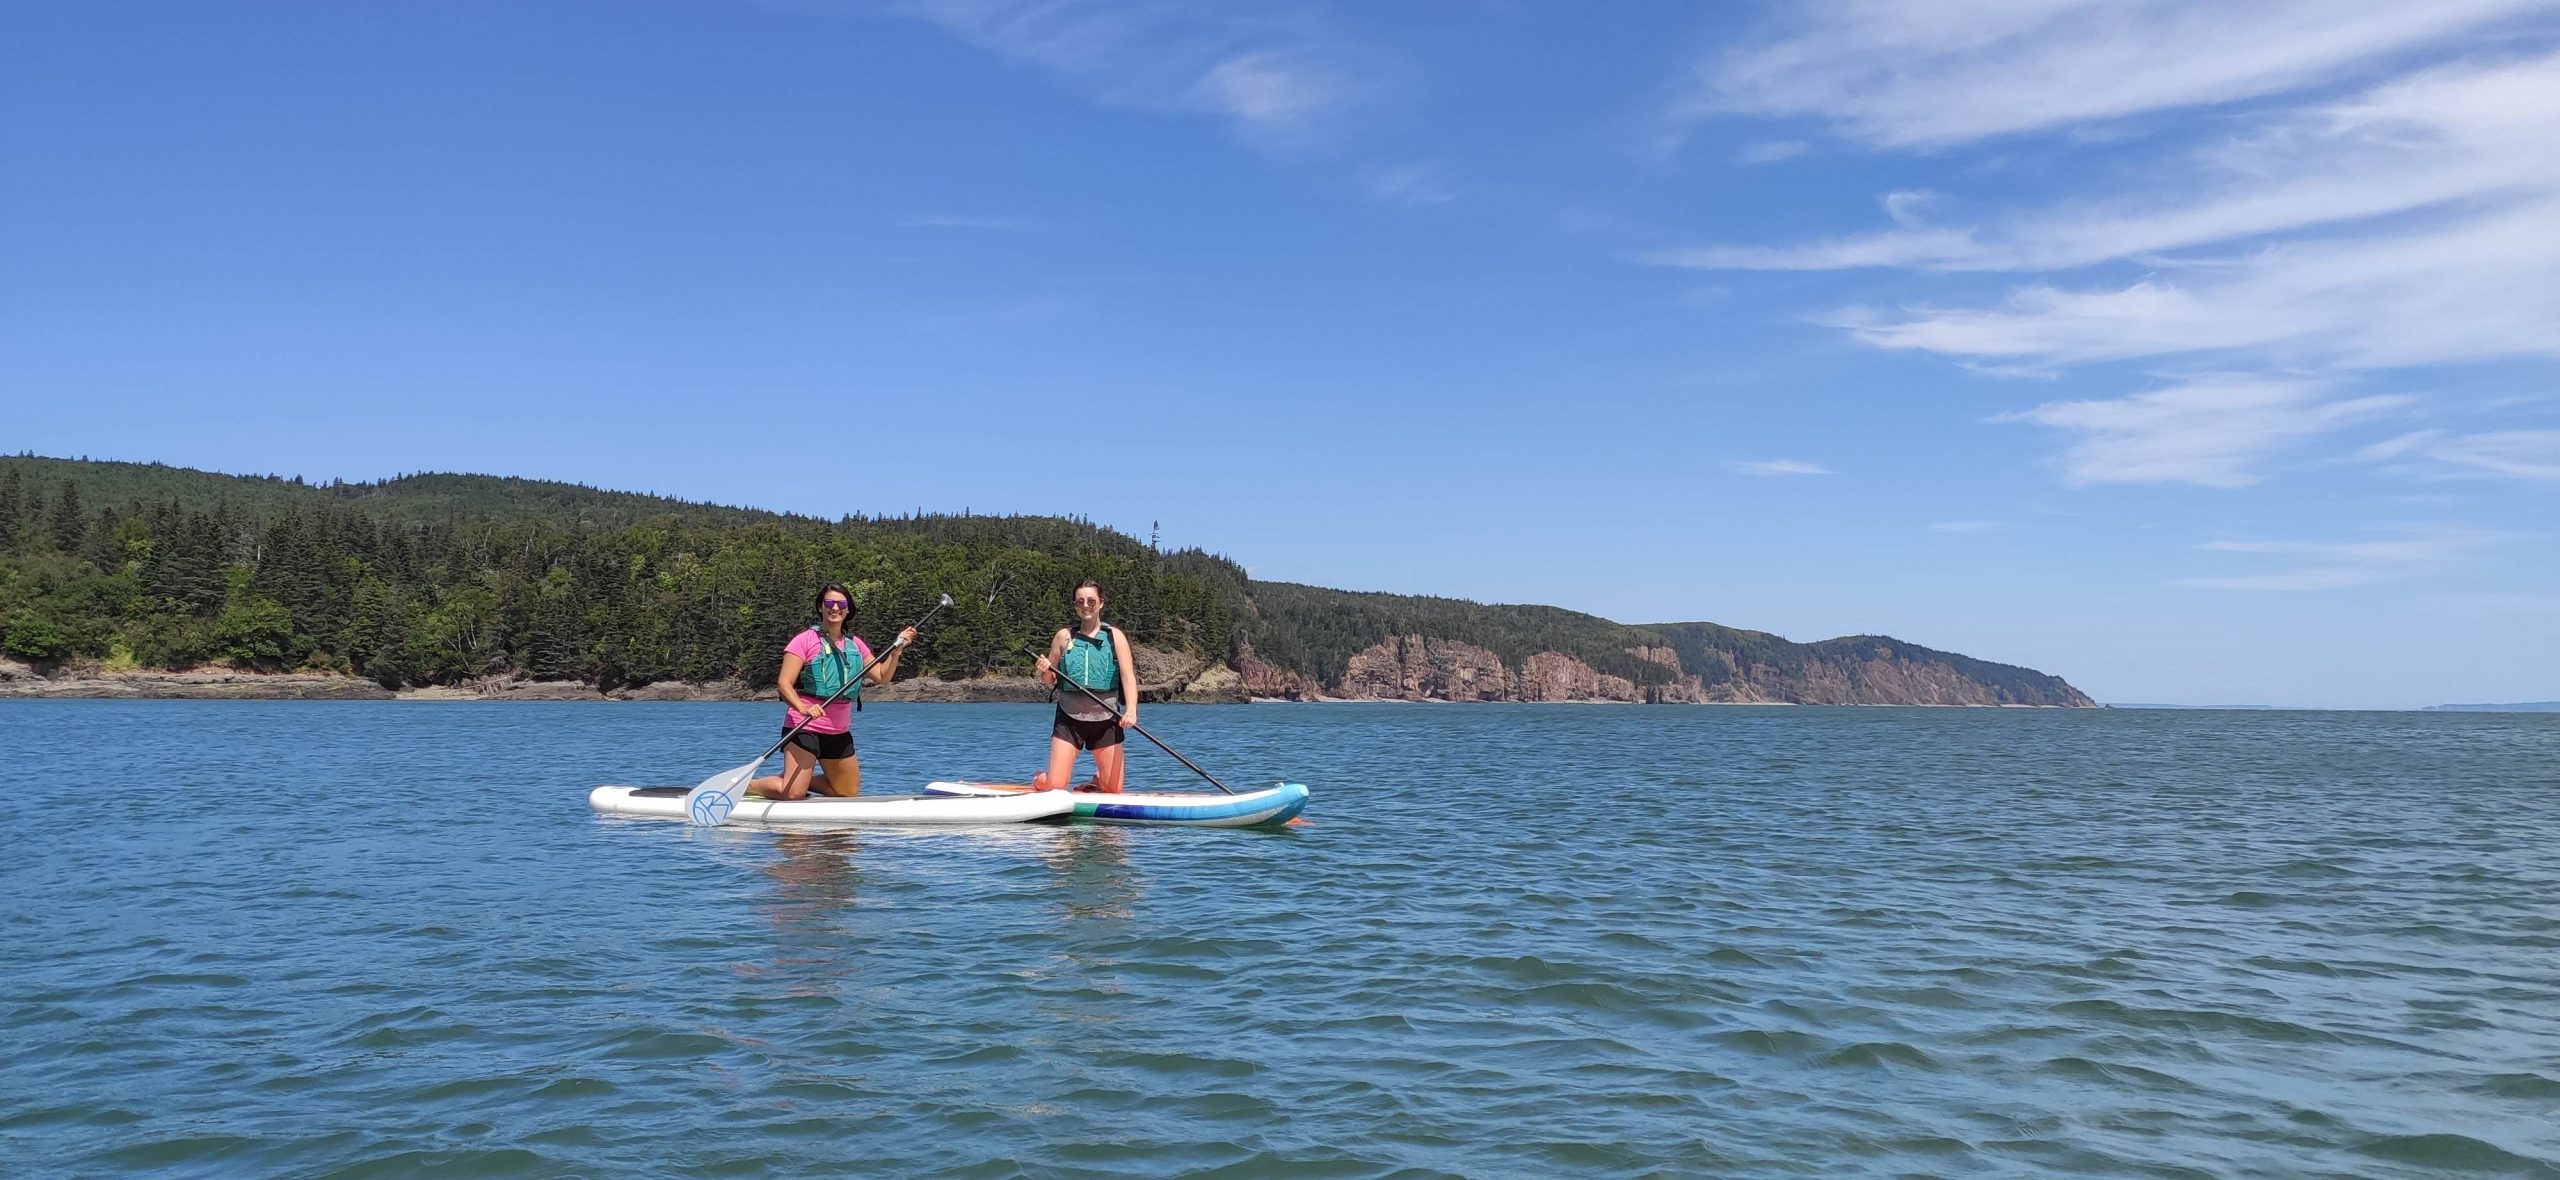 Cape d'Or stand-up paddlers